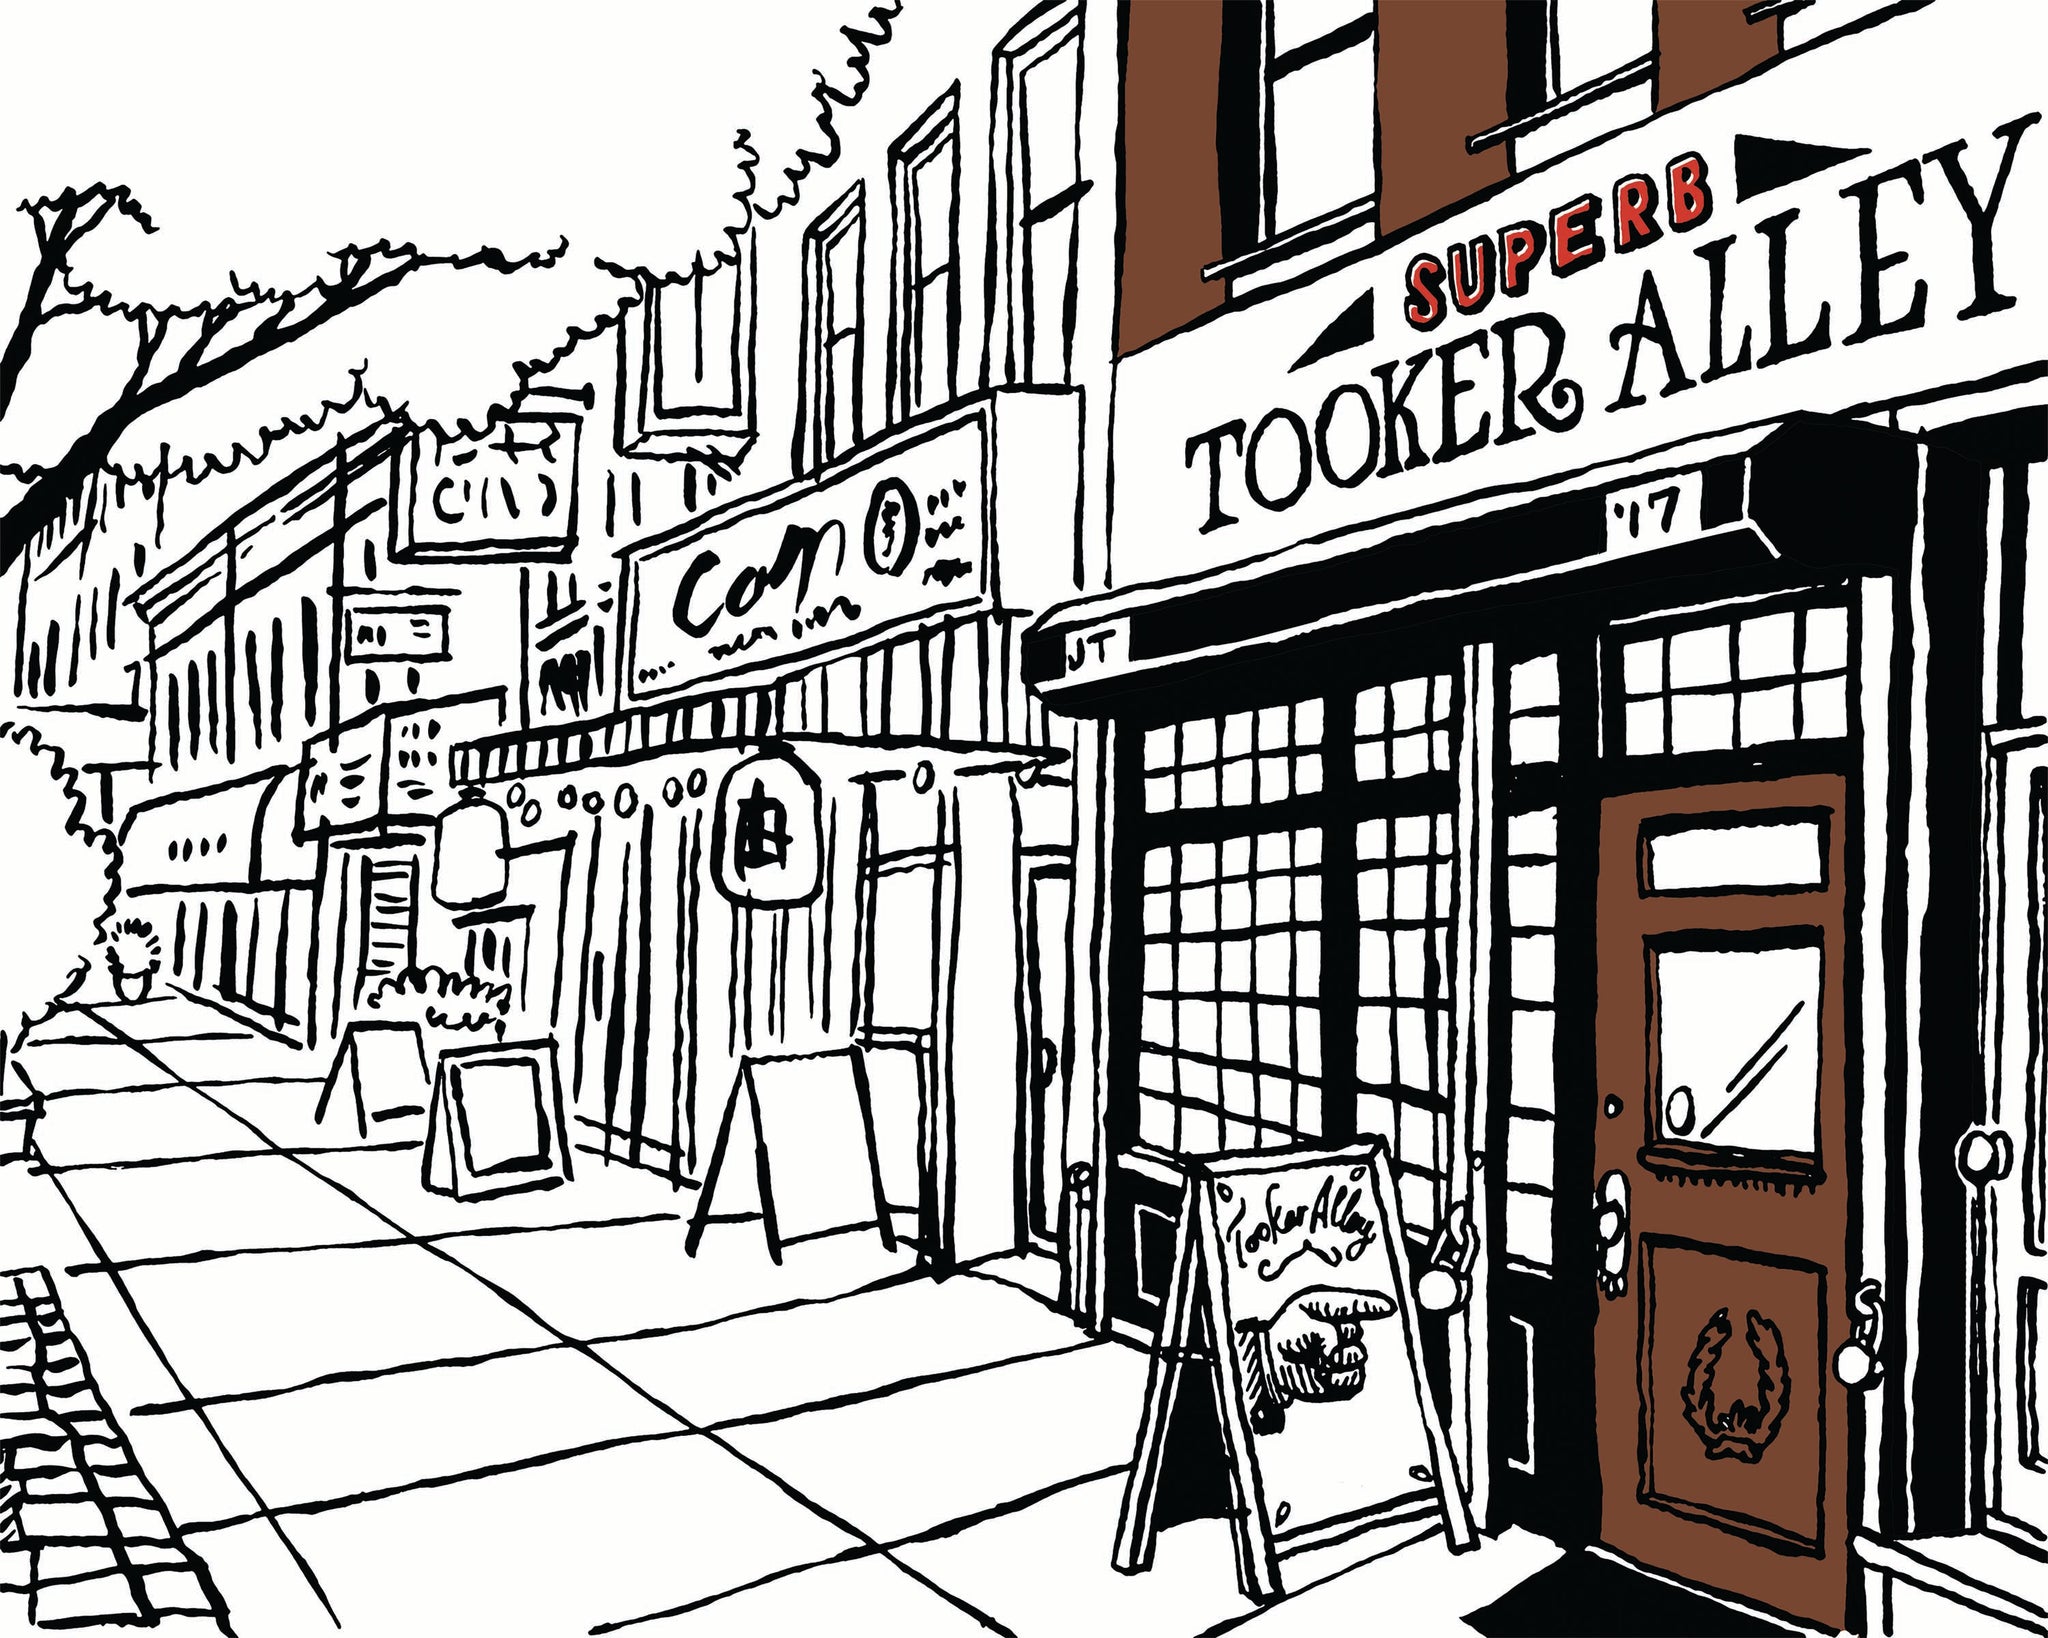 Tooker Alley, a favorite bar of Brooklyn, New York signed prints. (ships free in the US)